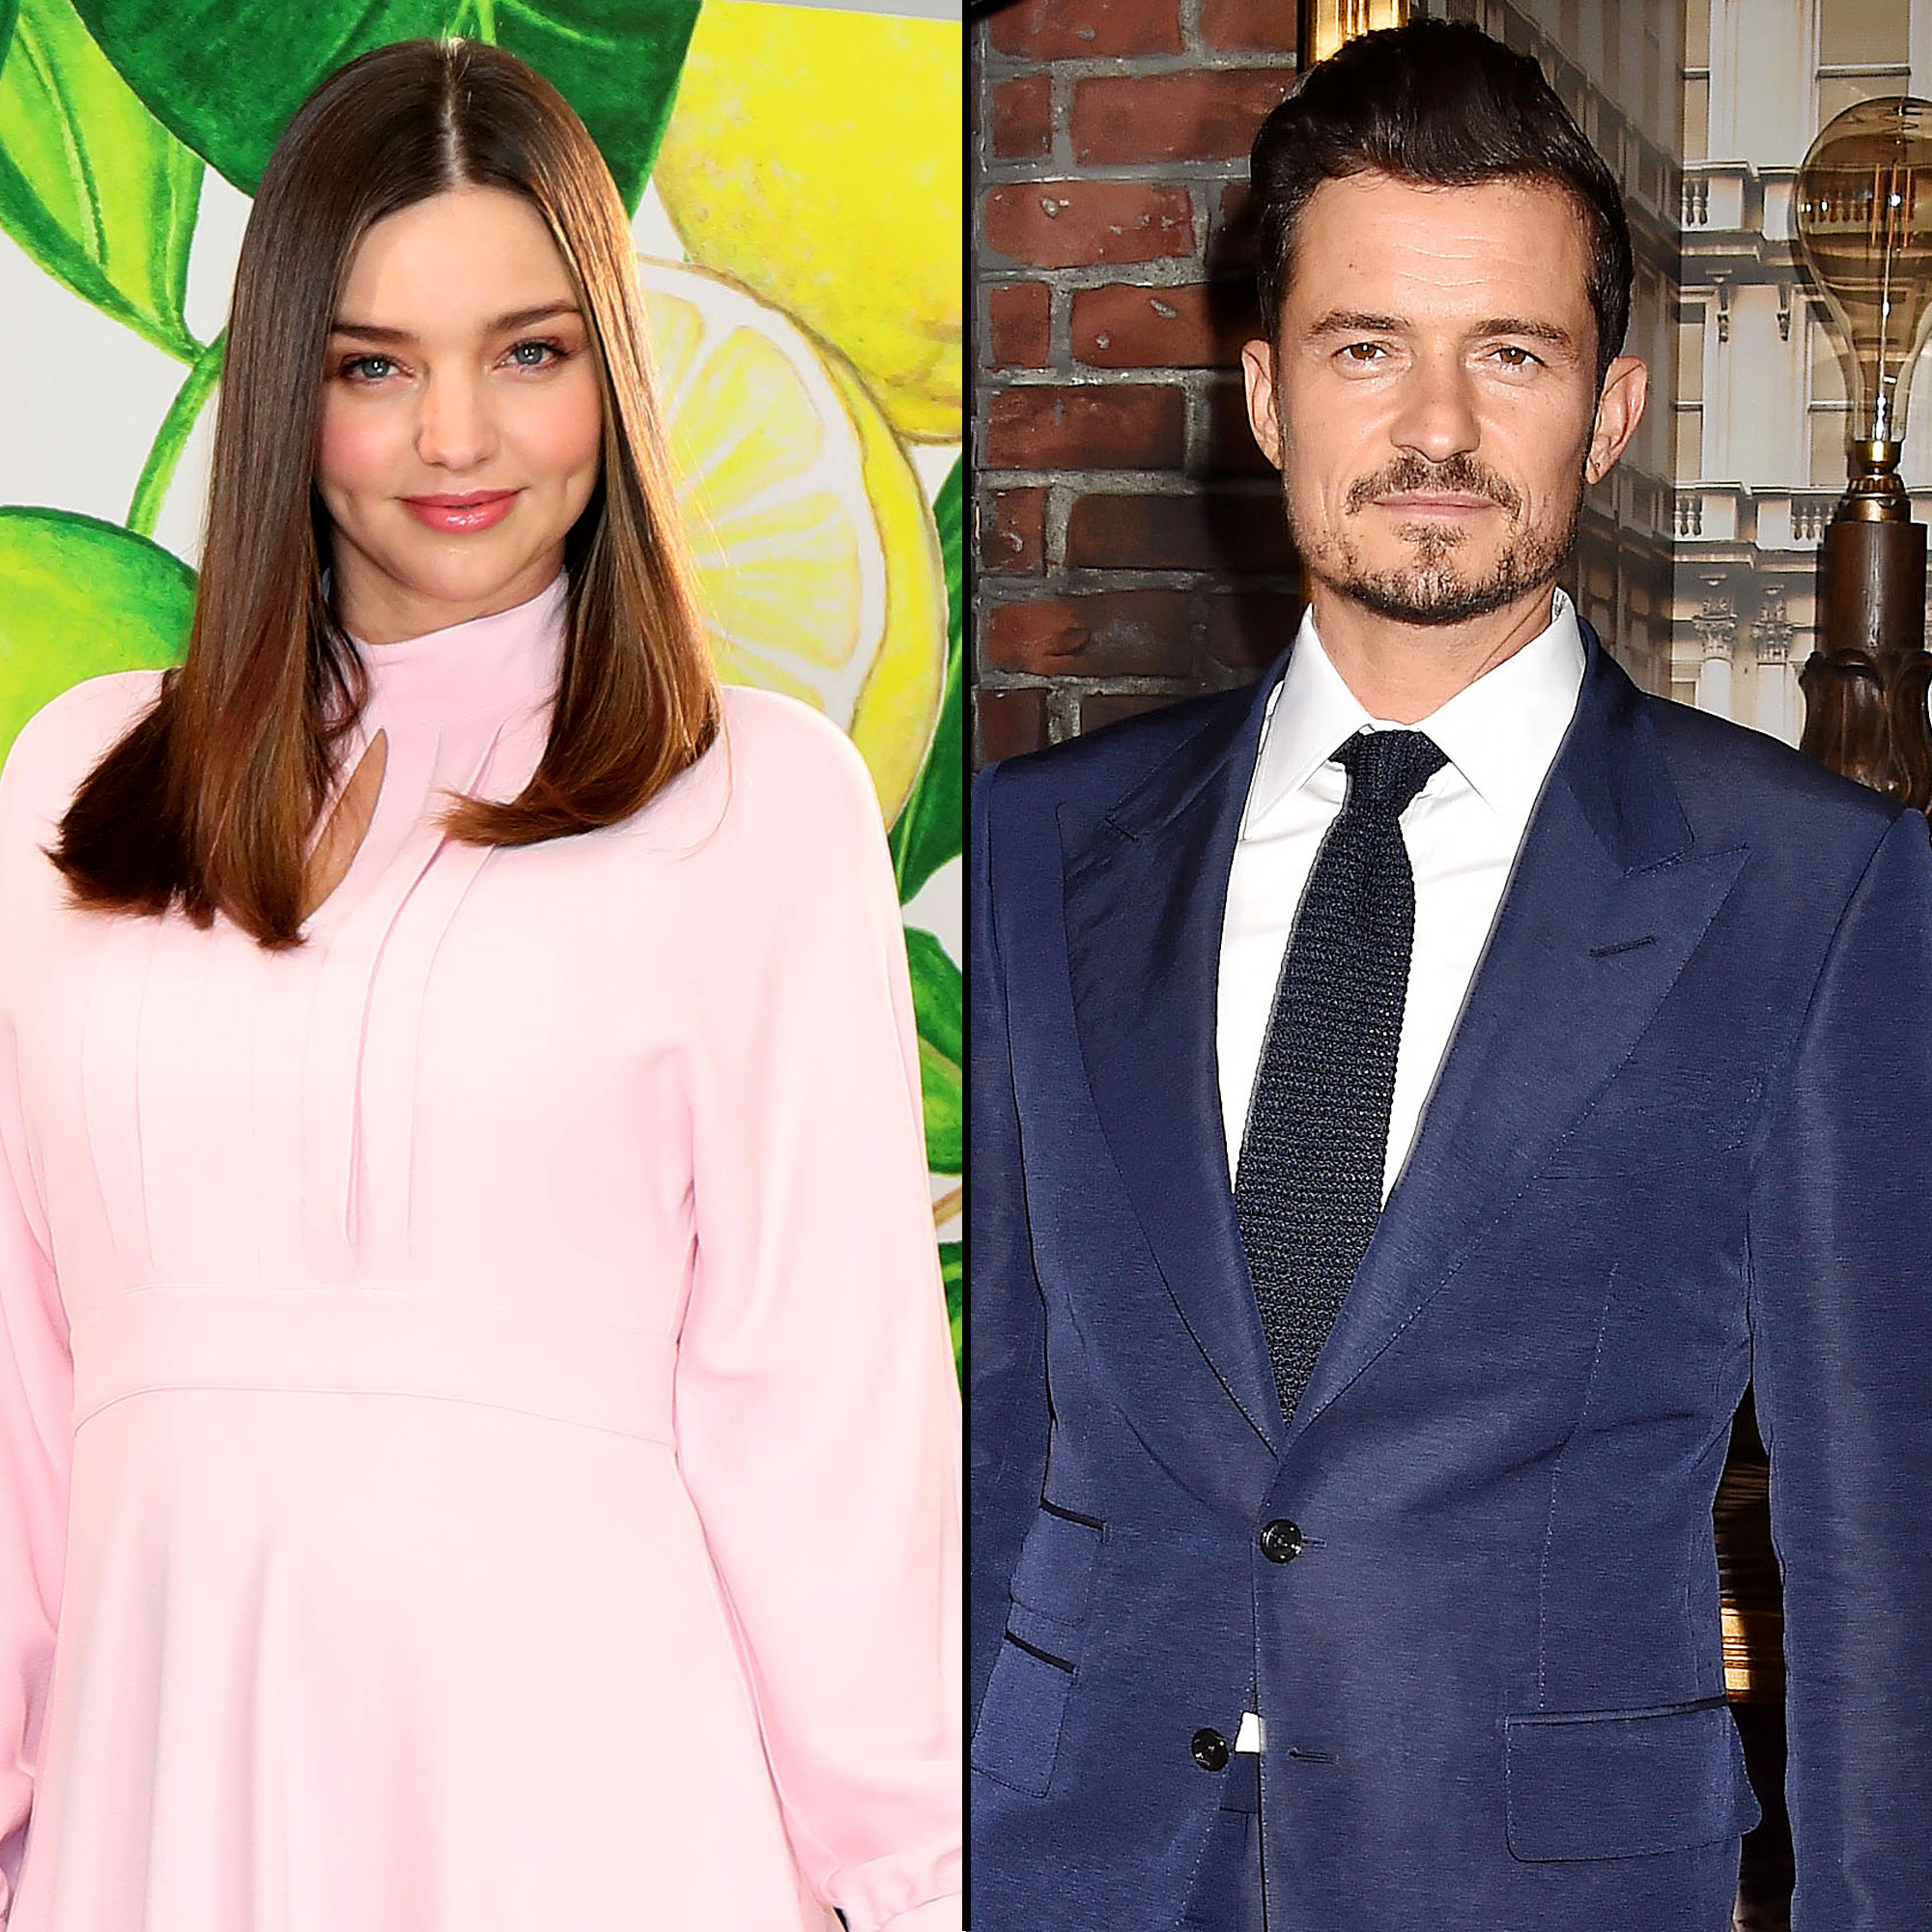 Miranda Kerr Opens Up About What It's Like Co-Parenting Her Son